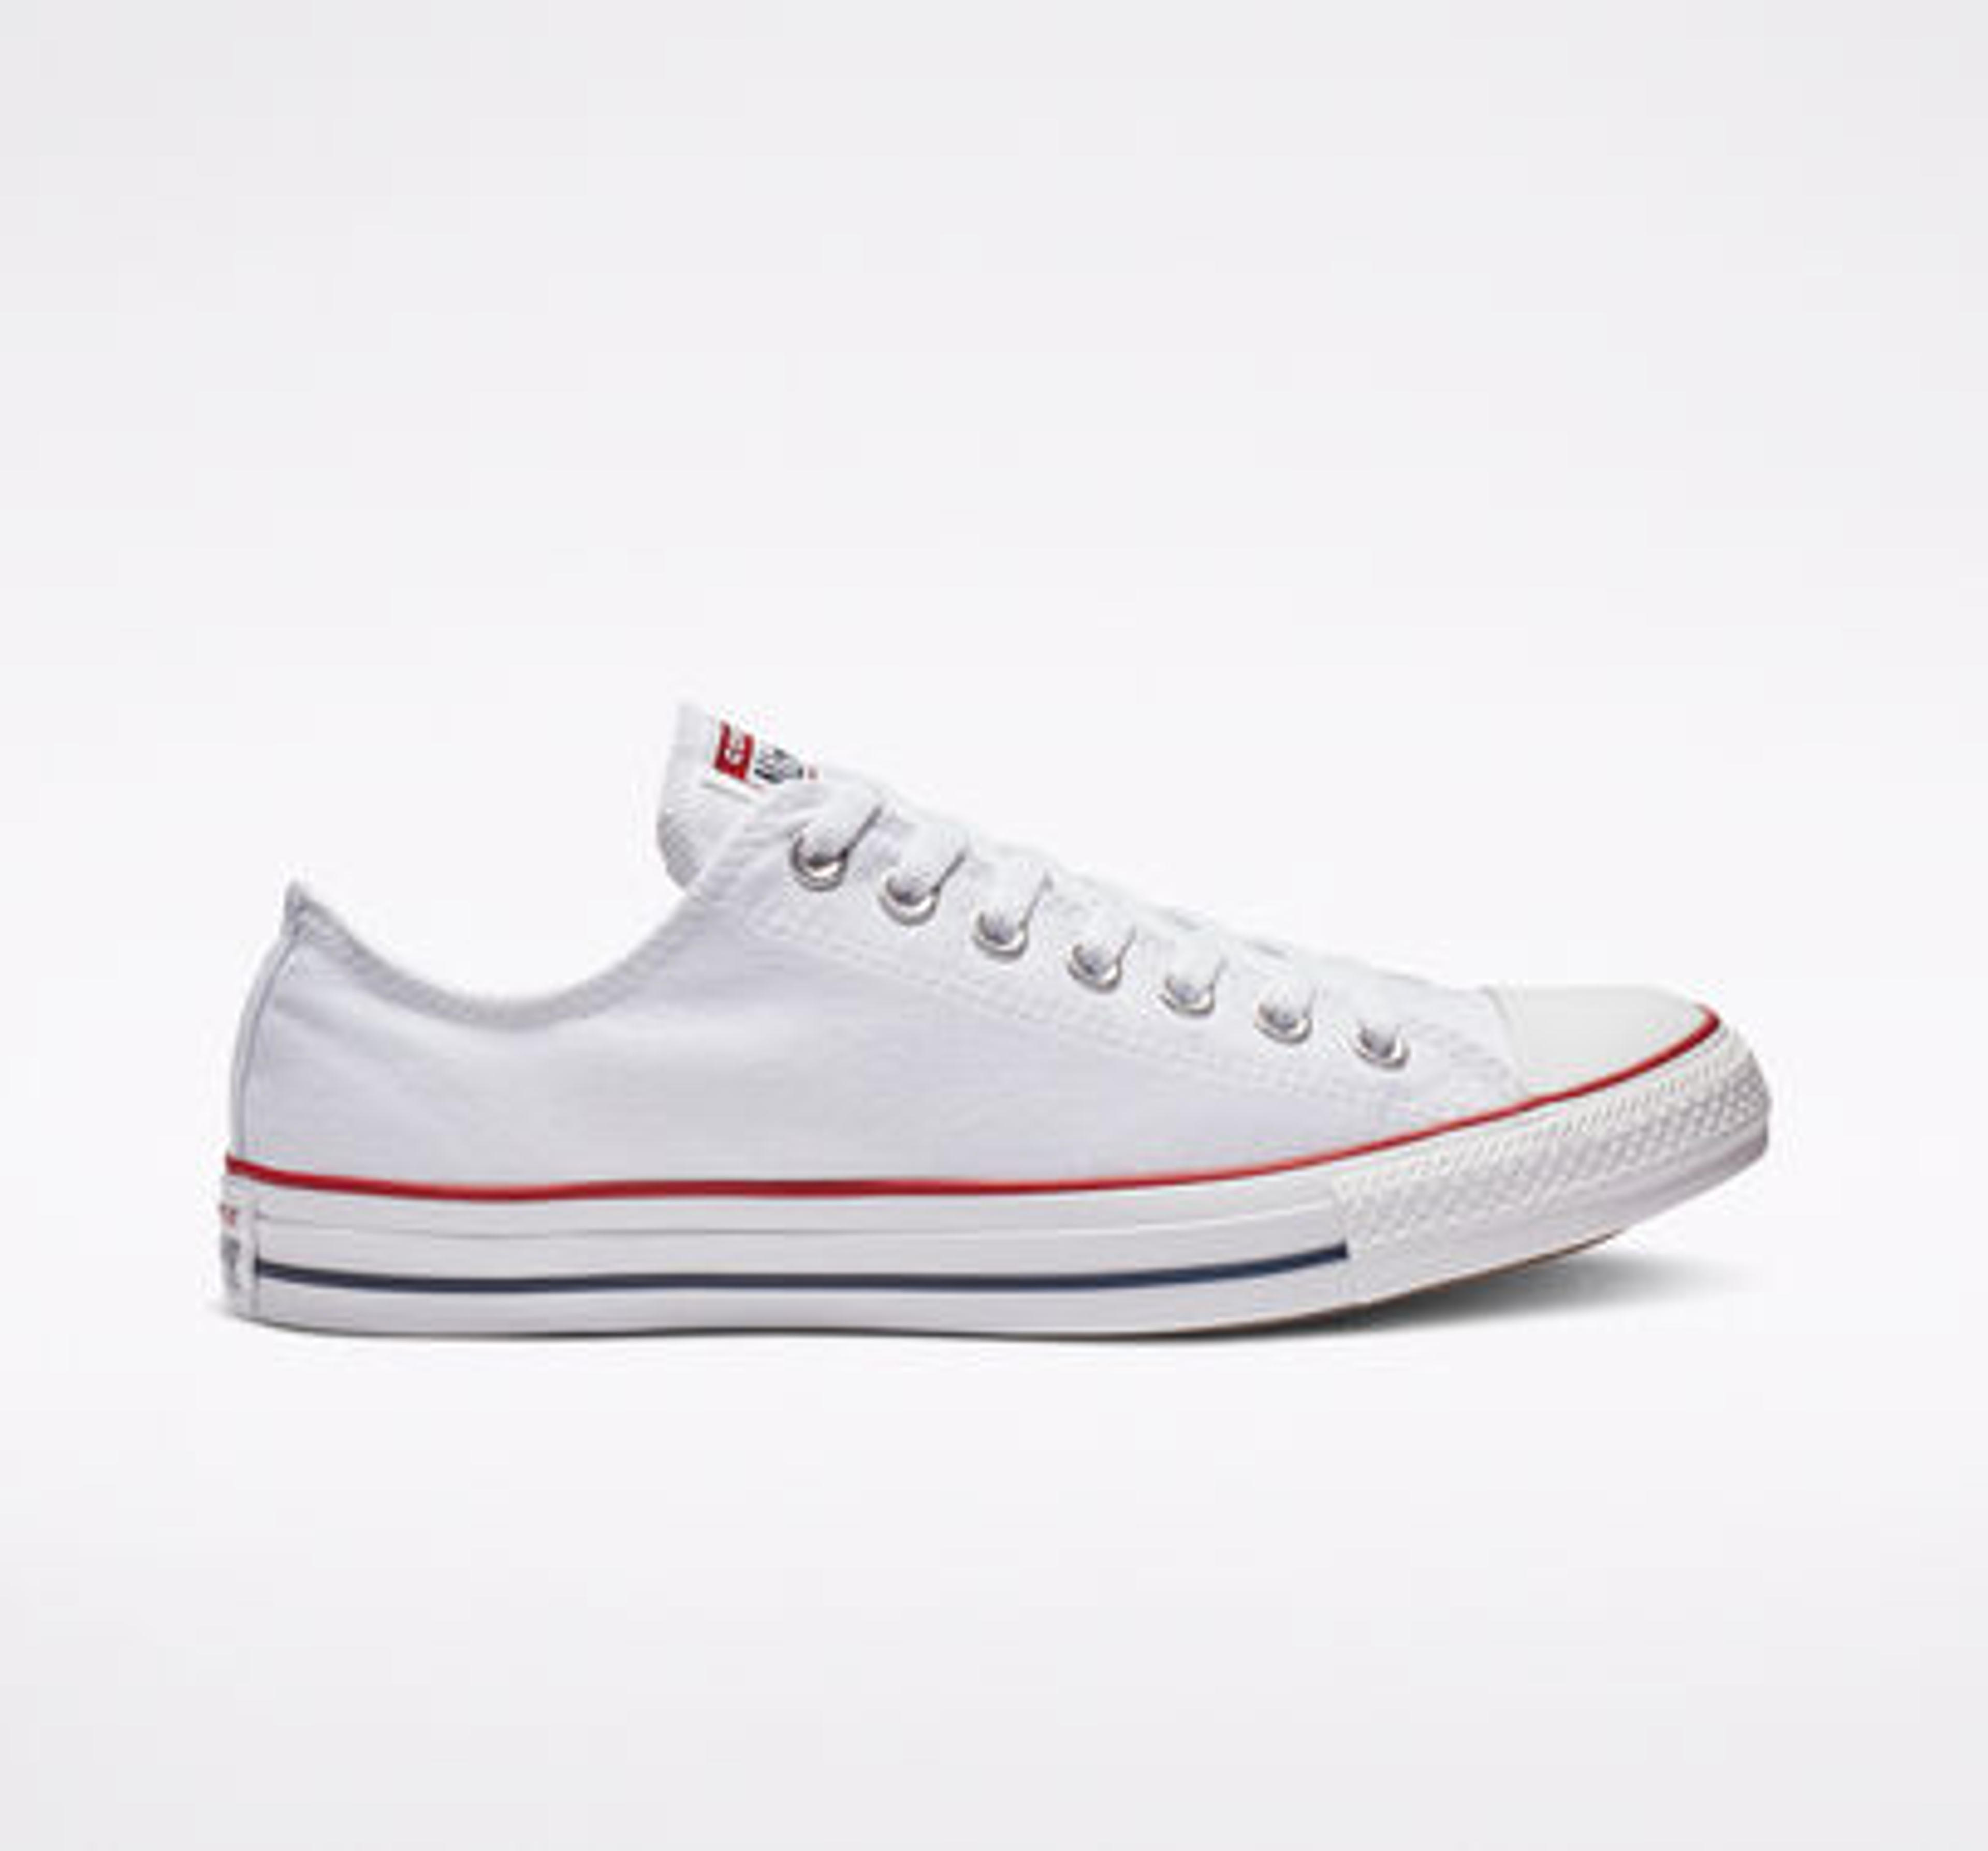 Chuck Taylor All Star Optical White Low Top Shoe